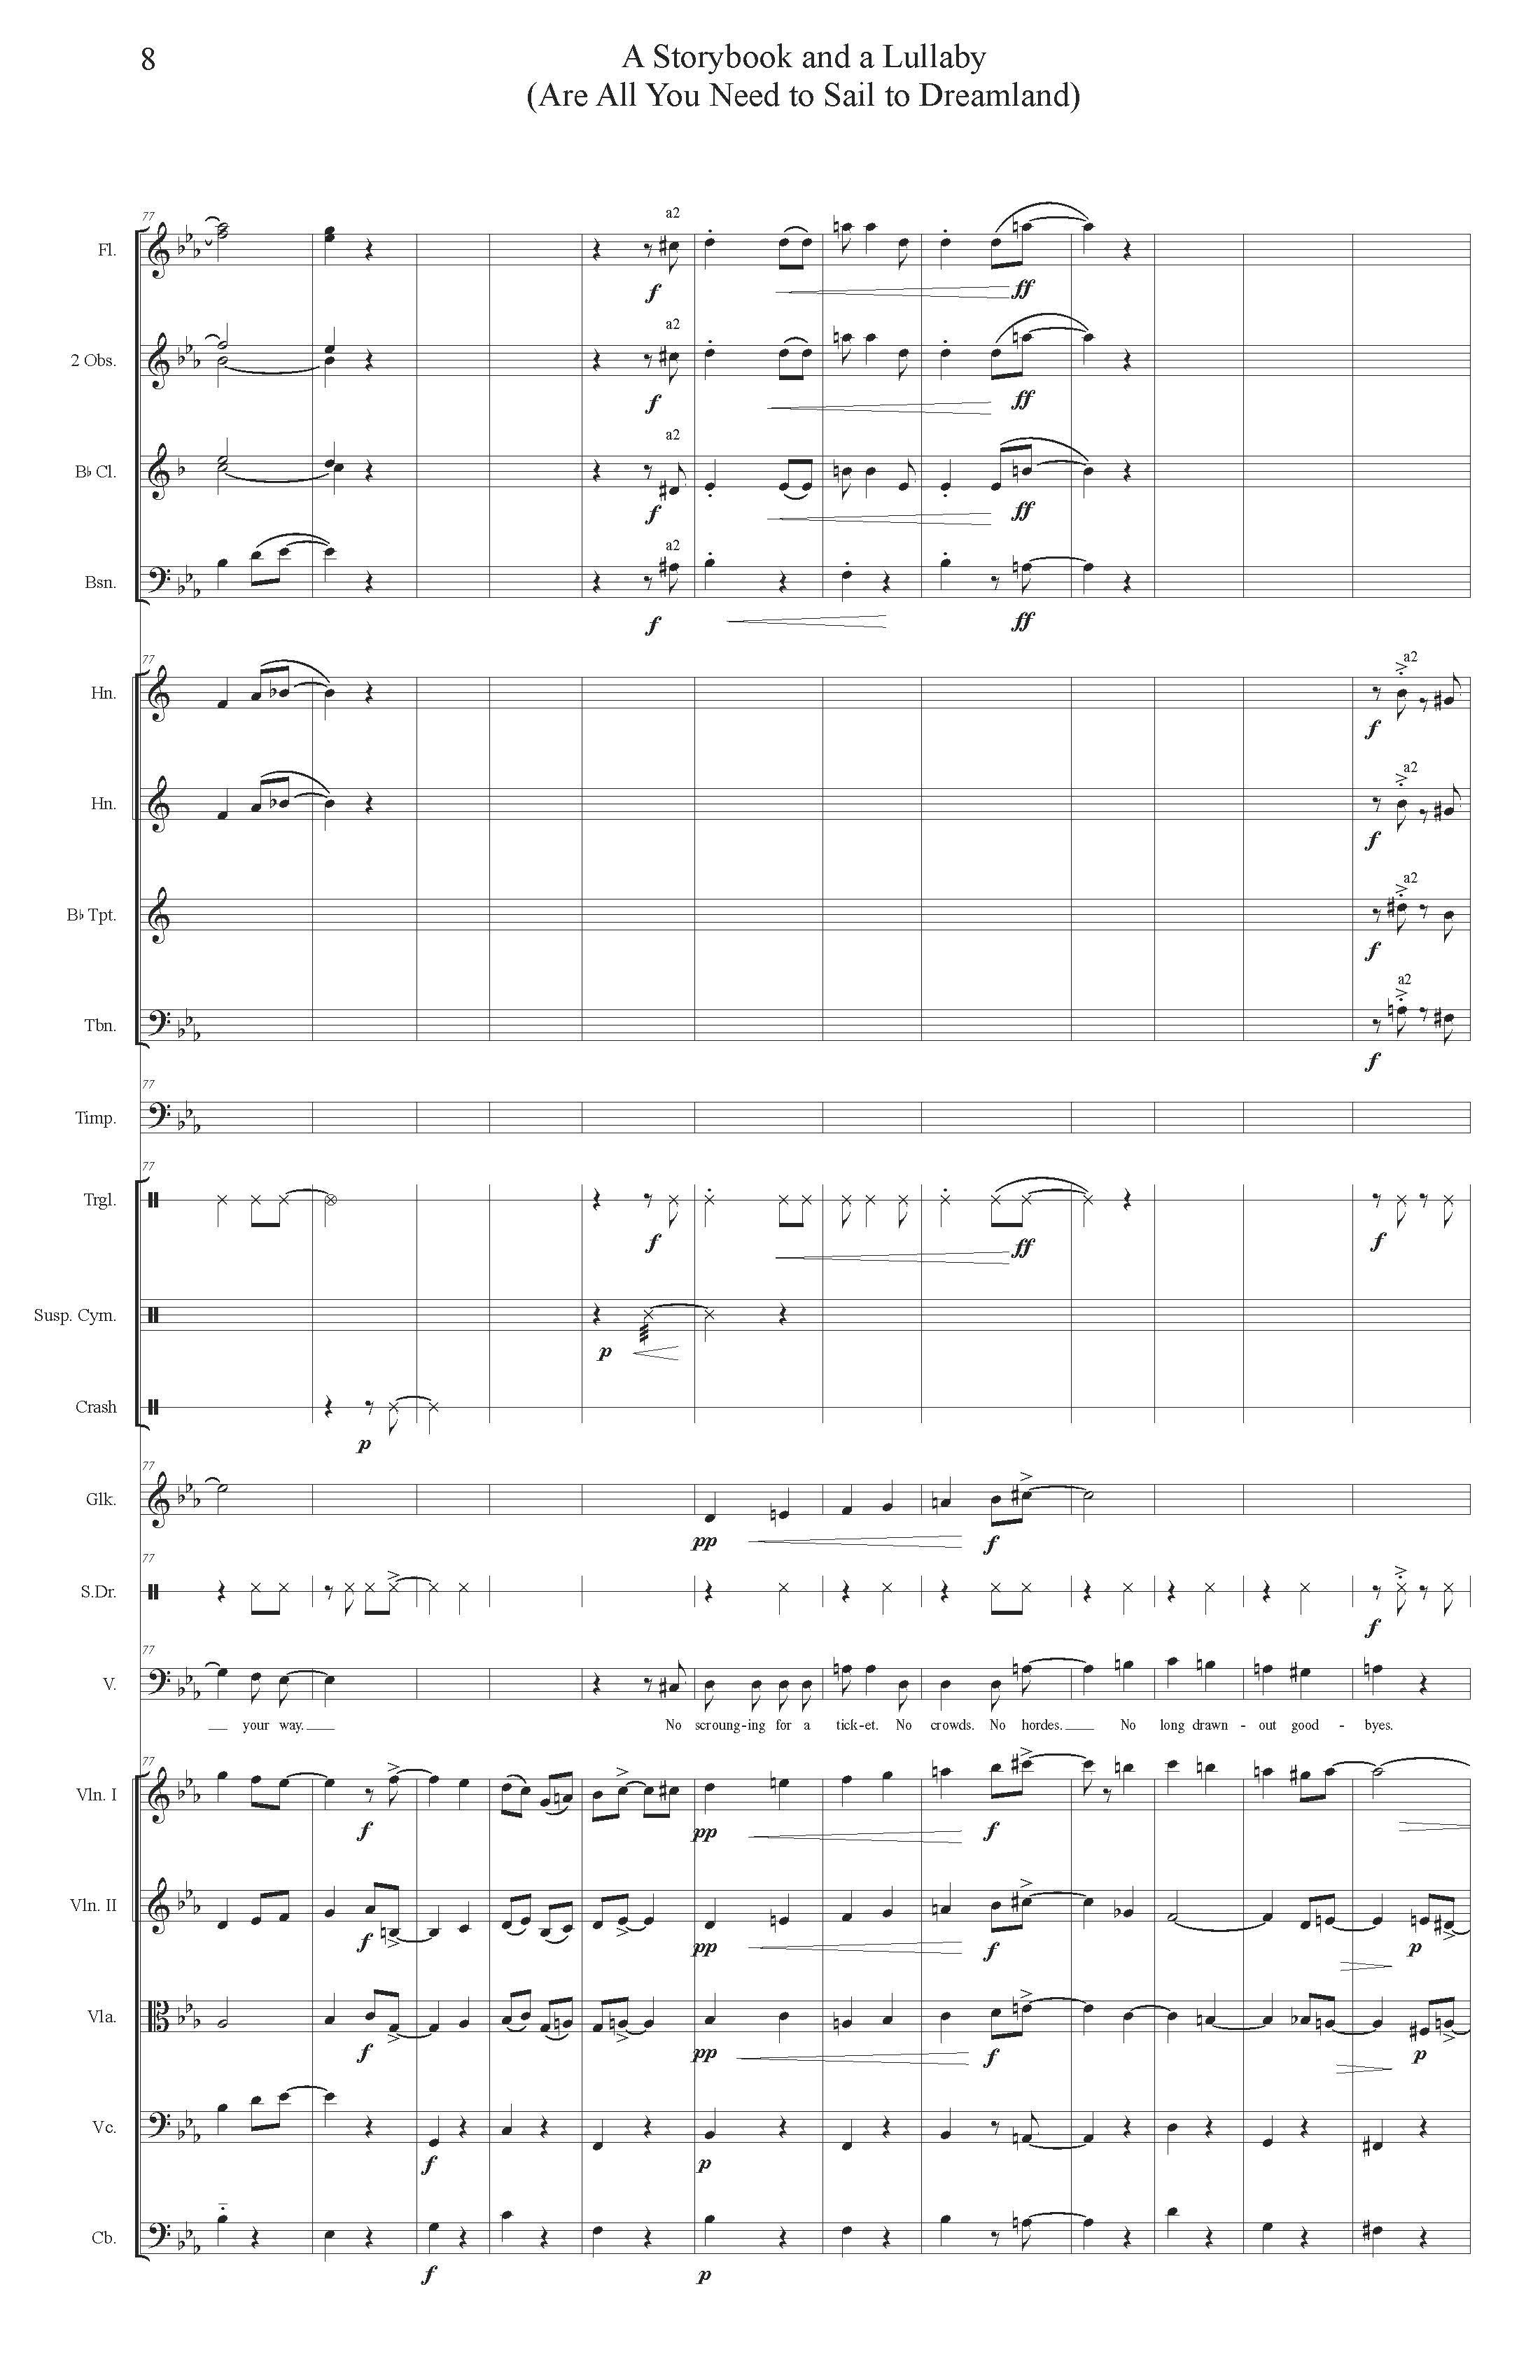 A STORYBOOK AND A LULLABY ORCH - Score_Page_08.jpg